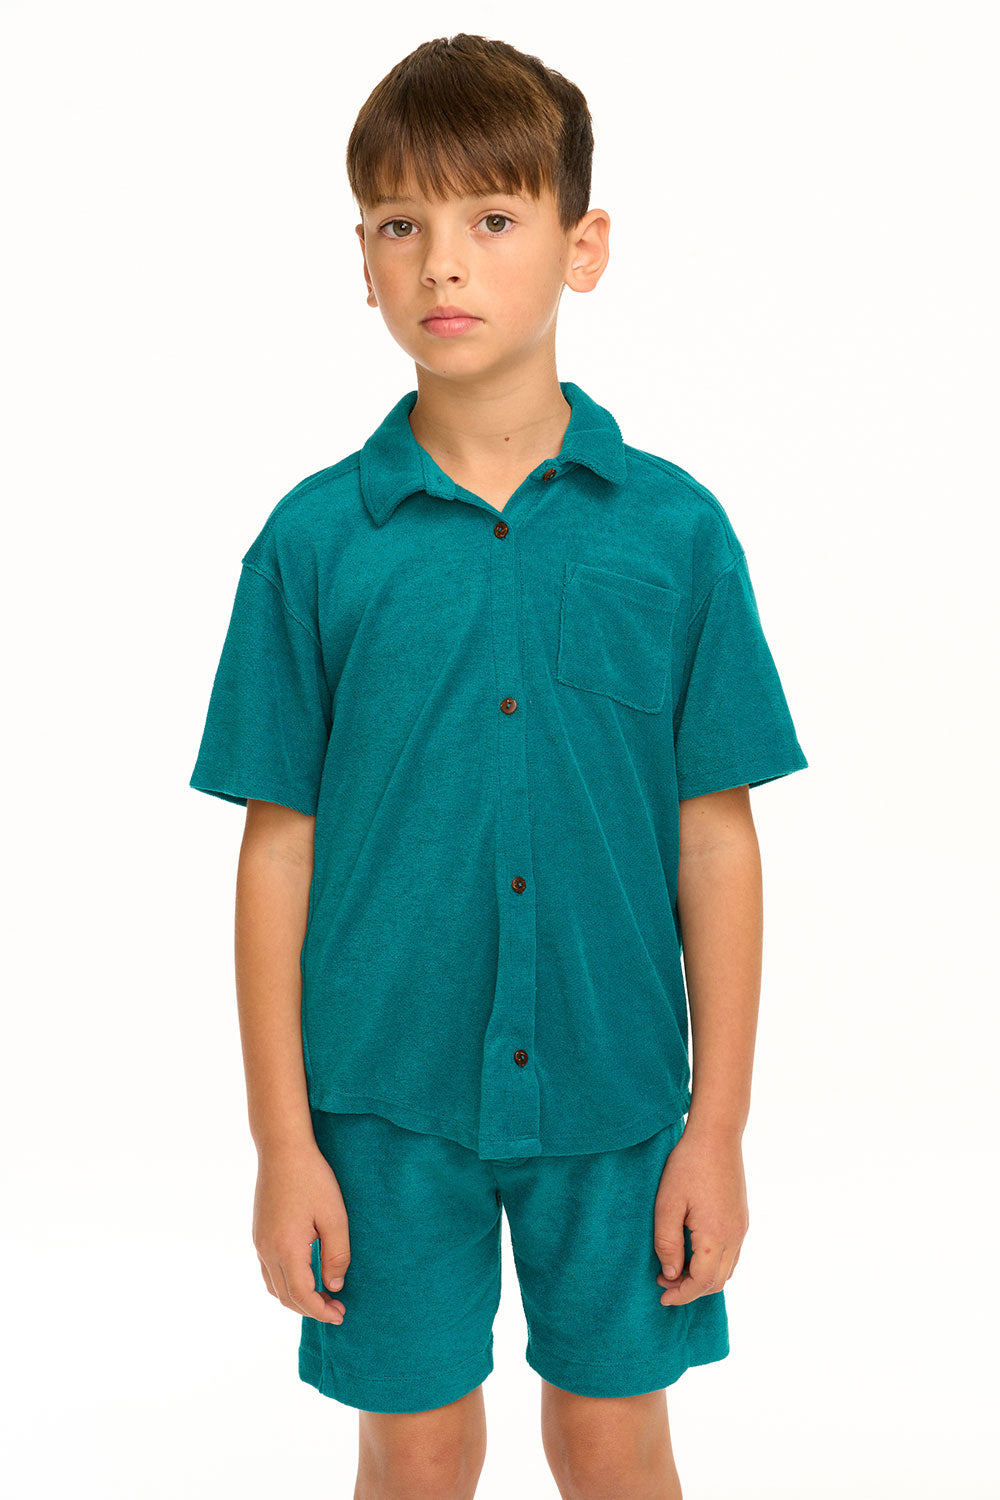 Boy's Lake Green Terry Cloth Button Down Collared Shirt BOYS chaserbrand